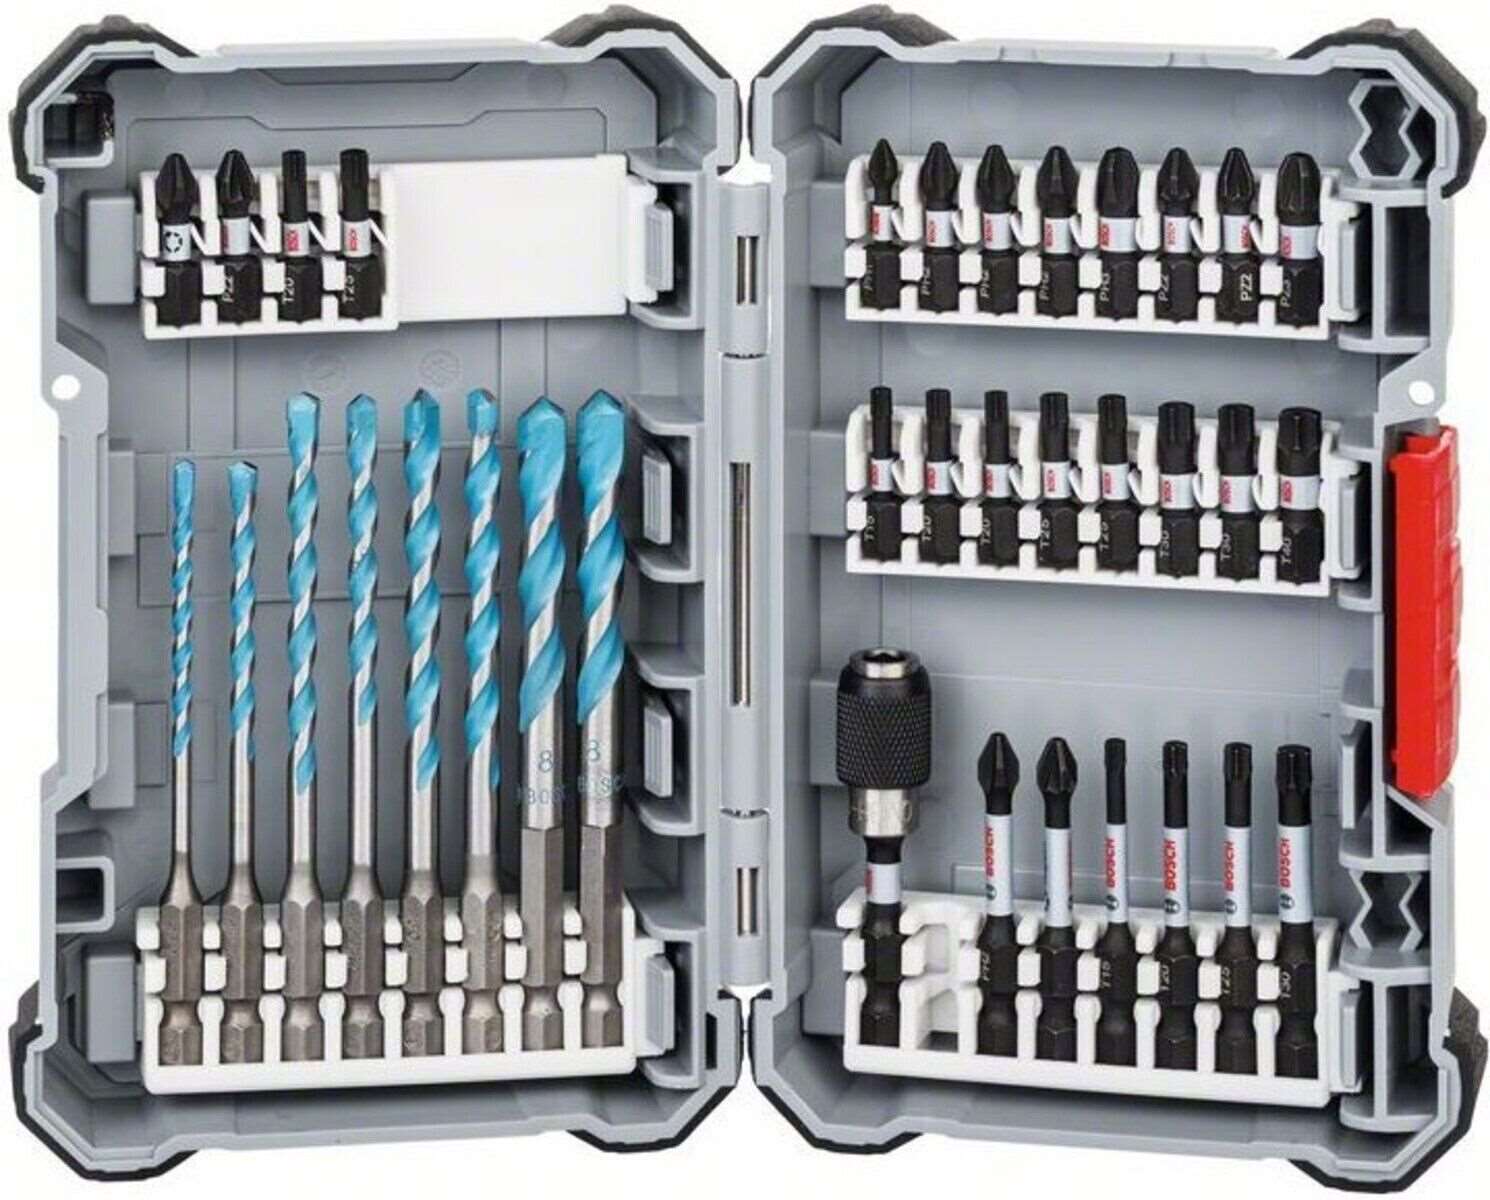 Bosch 35pc MultiConstruction and Impact Control Screwdriver Bit Set 2608577147 Power Tool Services